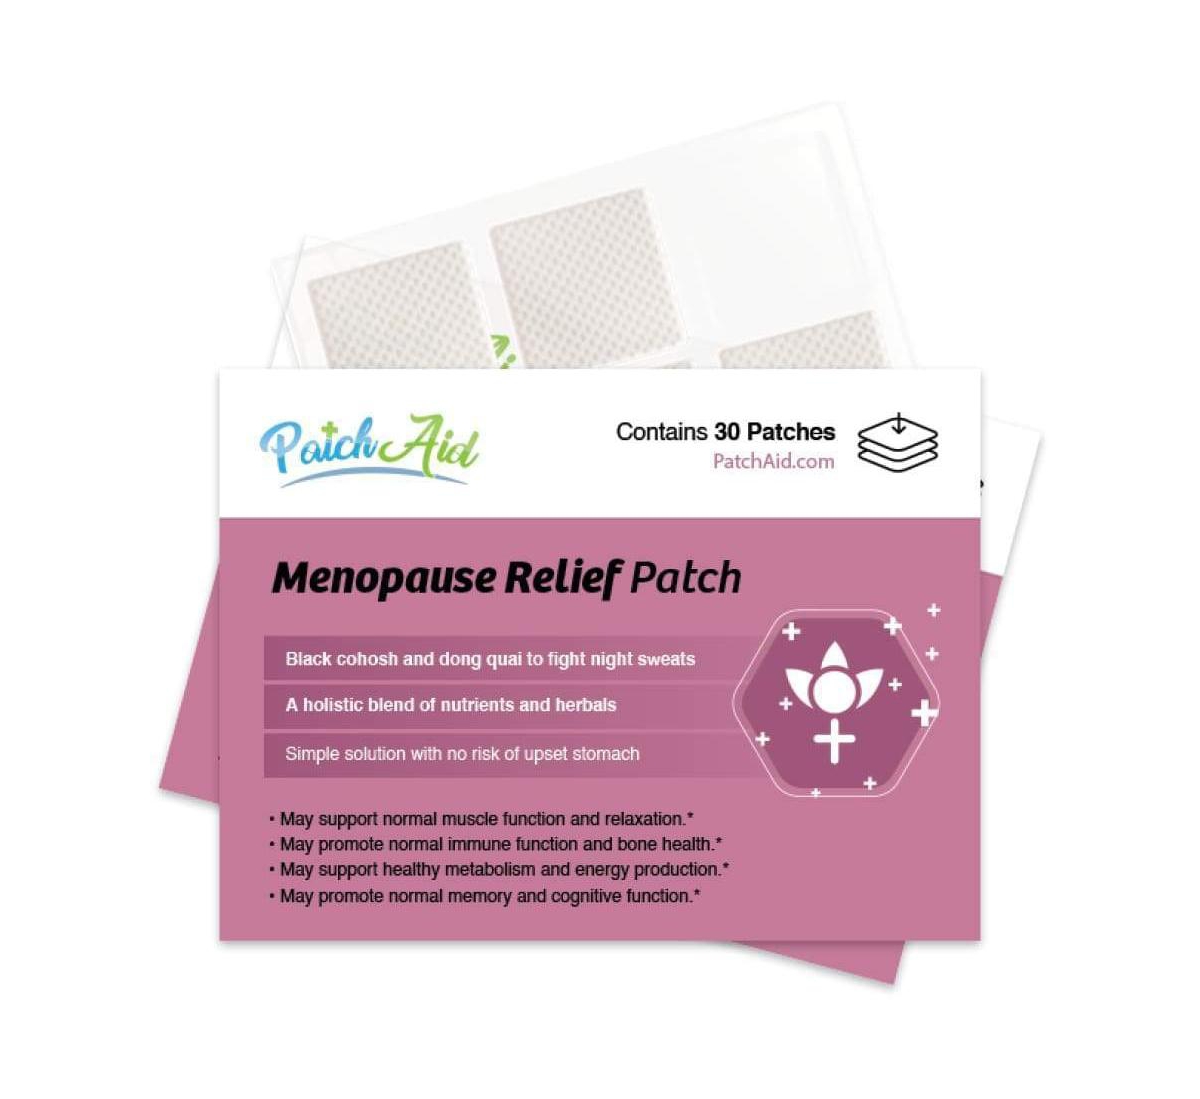 Menopause Relief Patch by PatchAid (30-Day Supply) - White